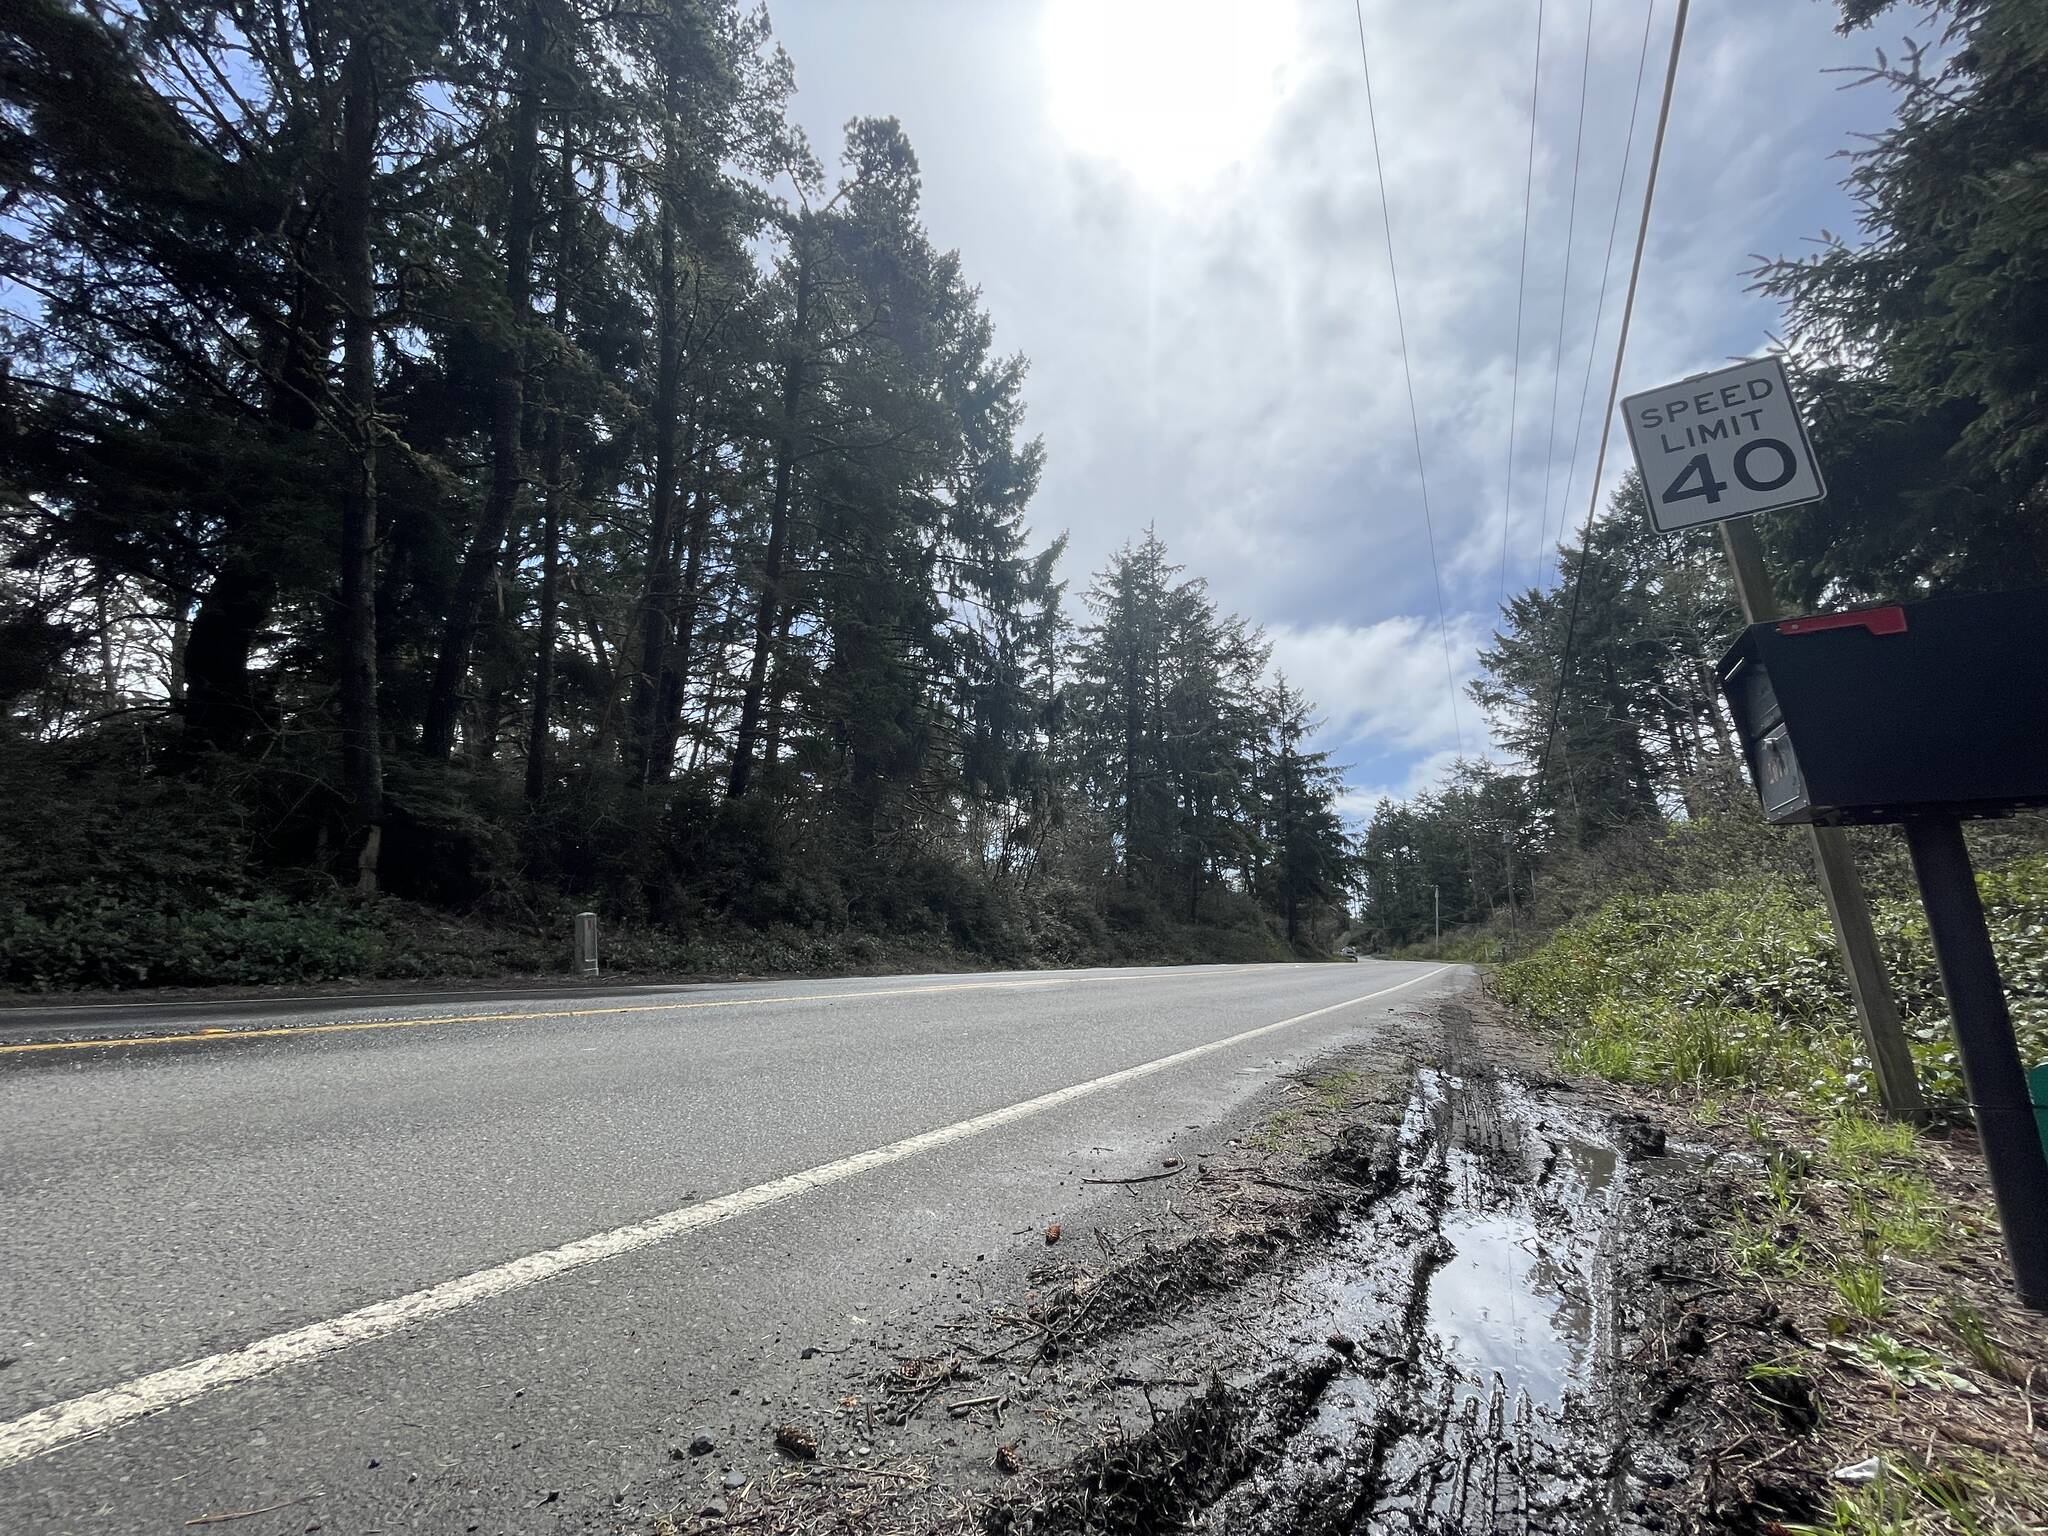 Multiple cars were involved in a motor vehicle crash on SR-105 near Westport that resulted from a car being driven too fast in the hail, according to the Washington State Patrol. (Michael S. Lockett / The Daily World)